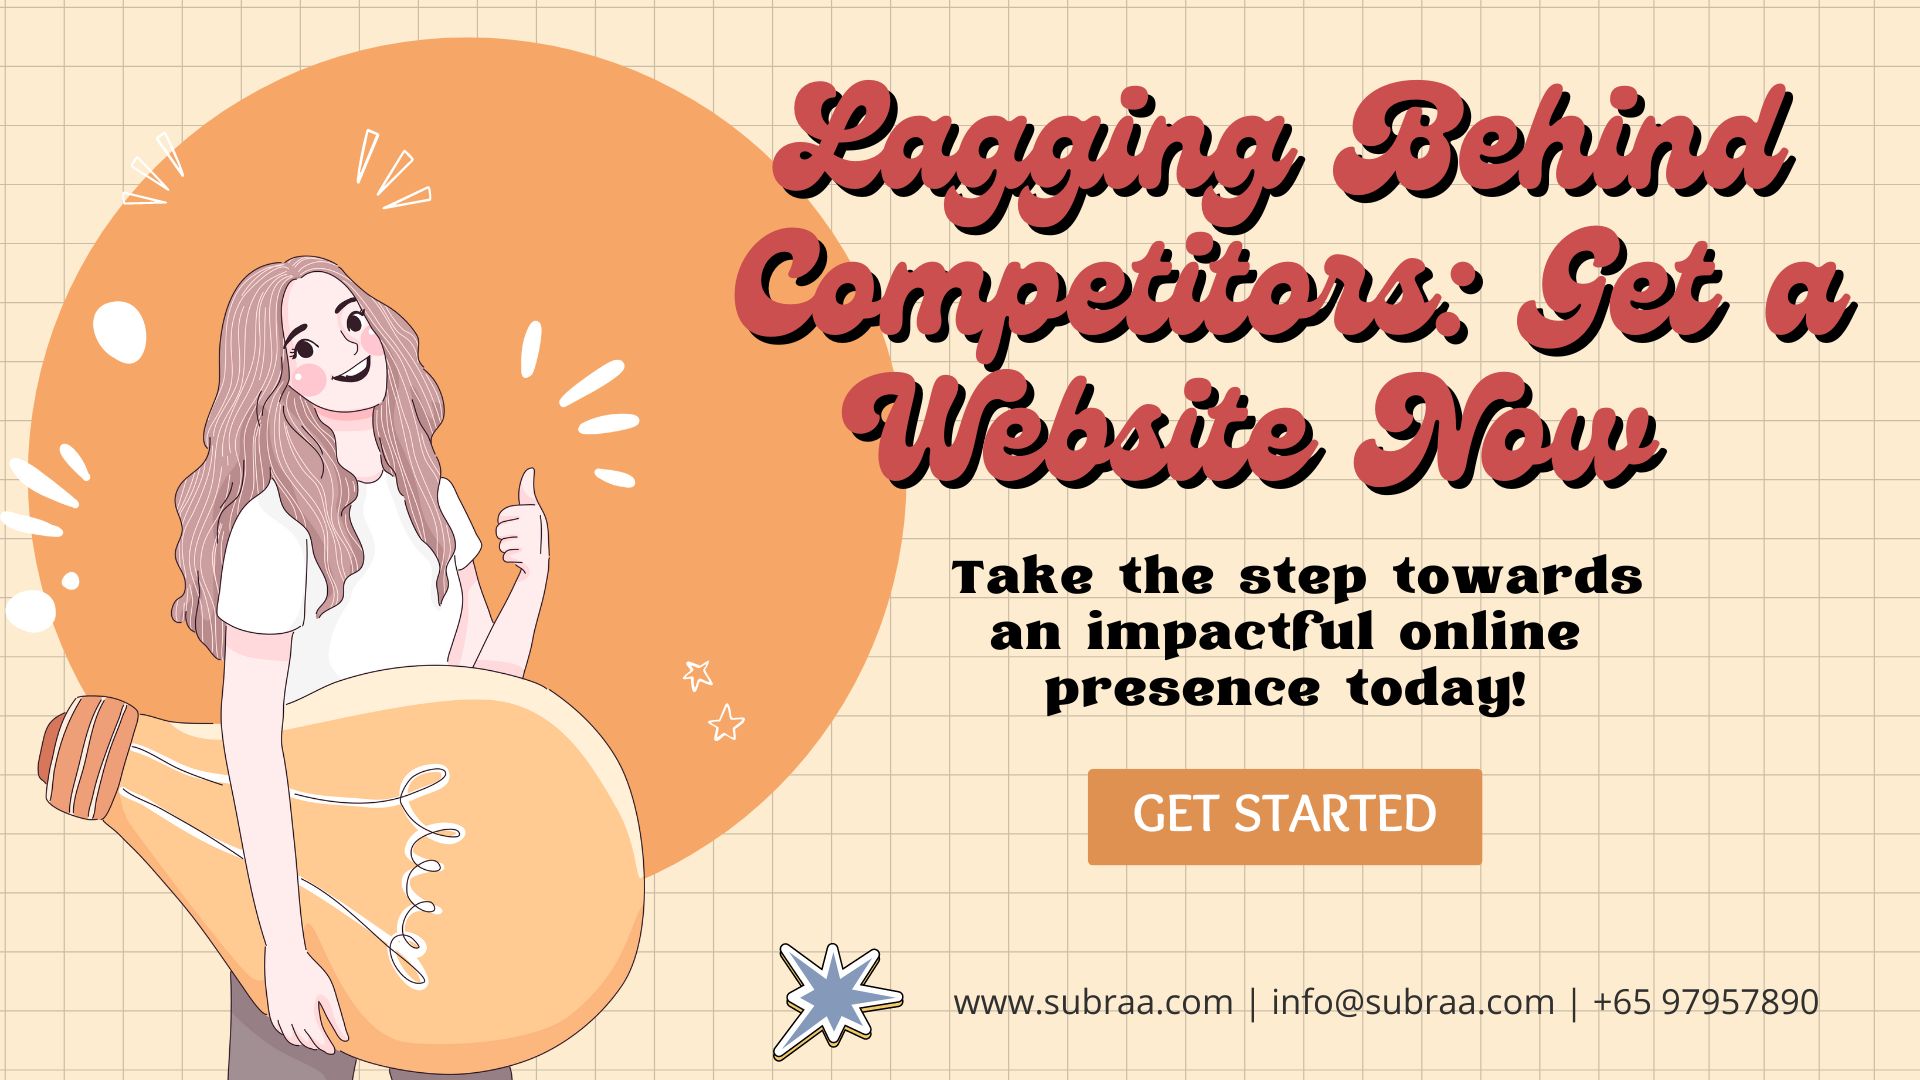 Get a Website now from Freelance Web Designer - Subraa